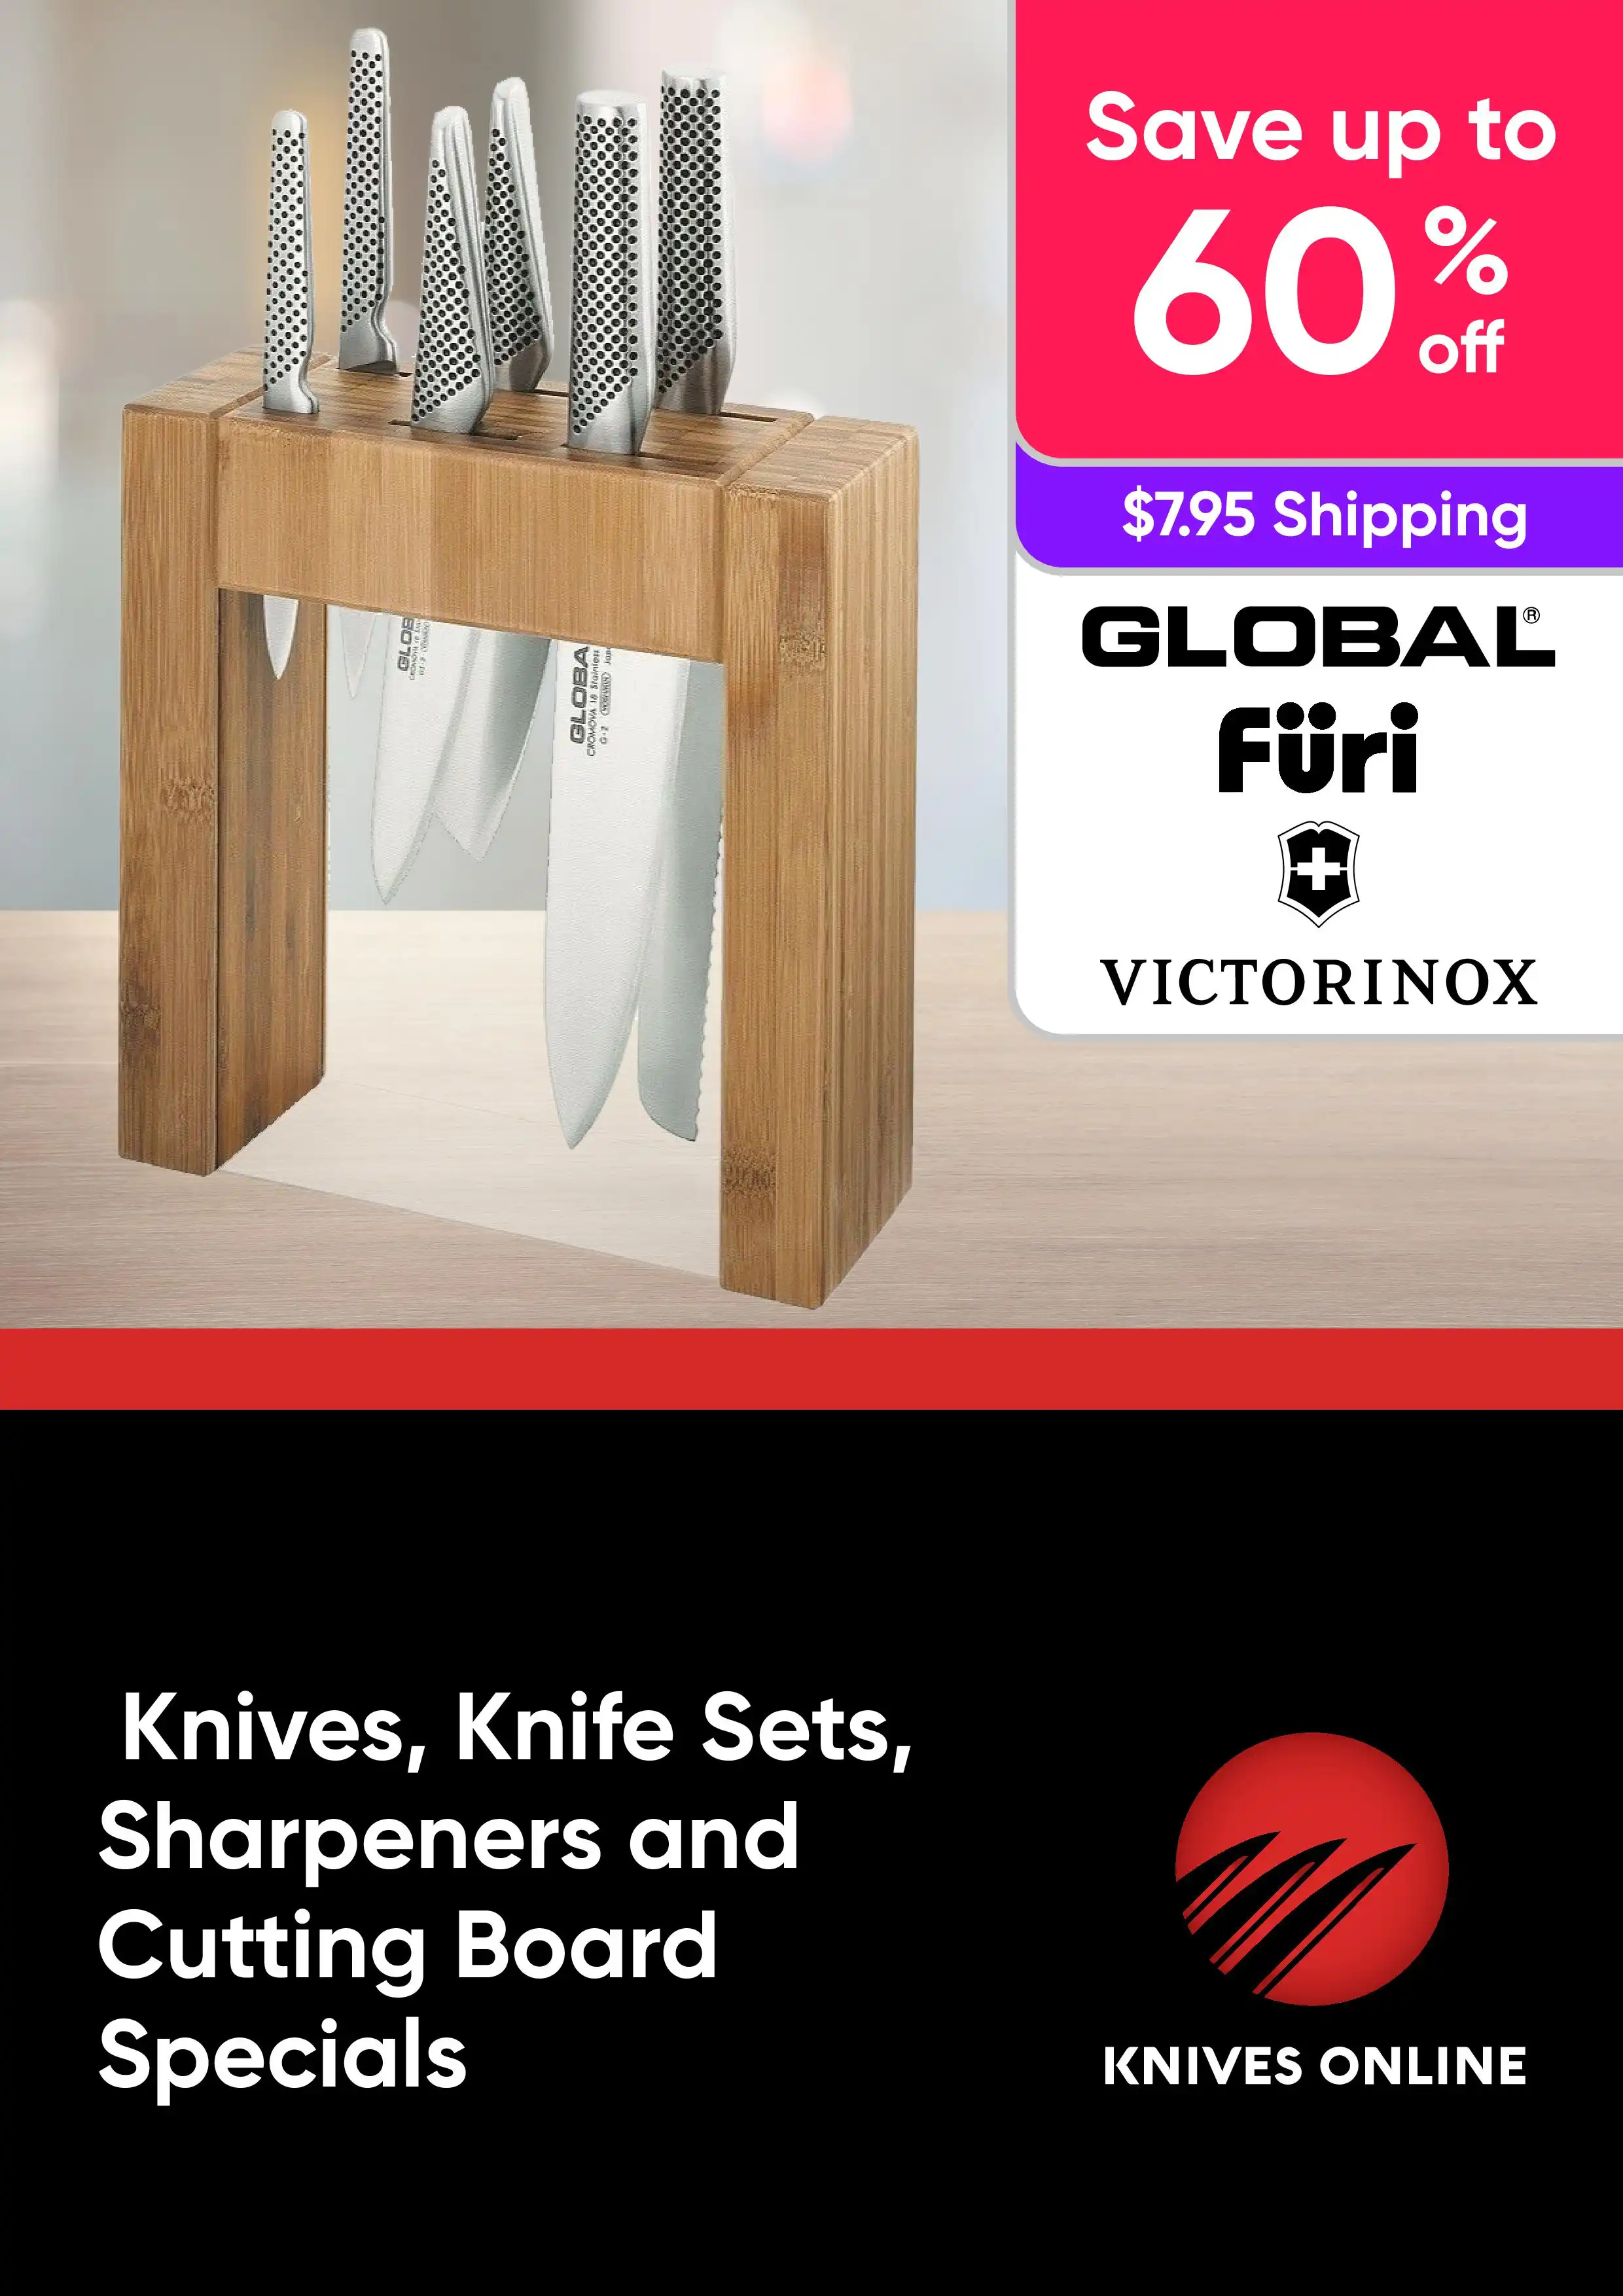 Knives, Knife Sets, Sharpeners and Cutting Board Specials - Global, Furi, Victorinox - Up to 60% off